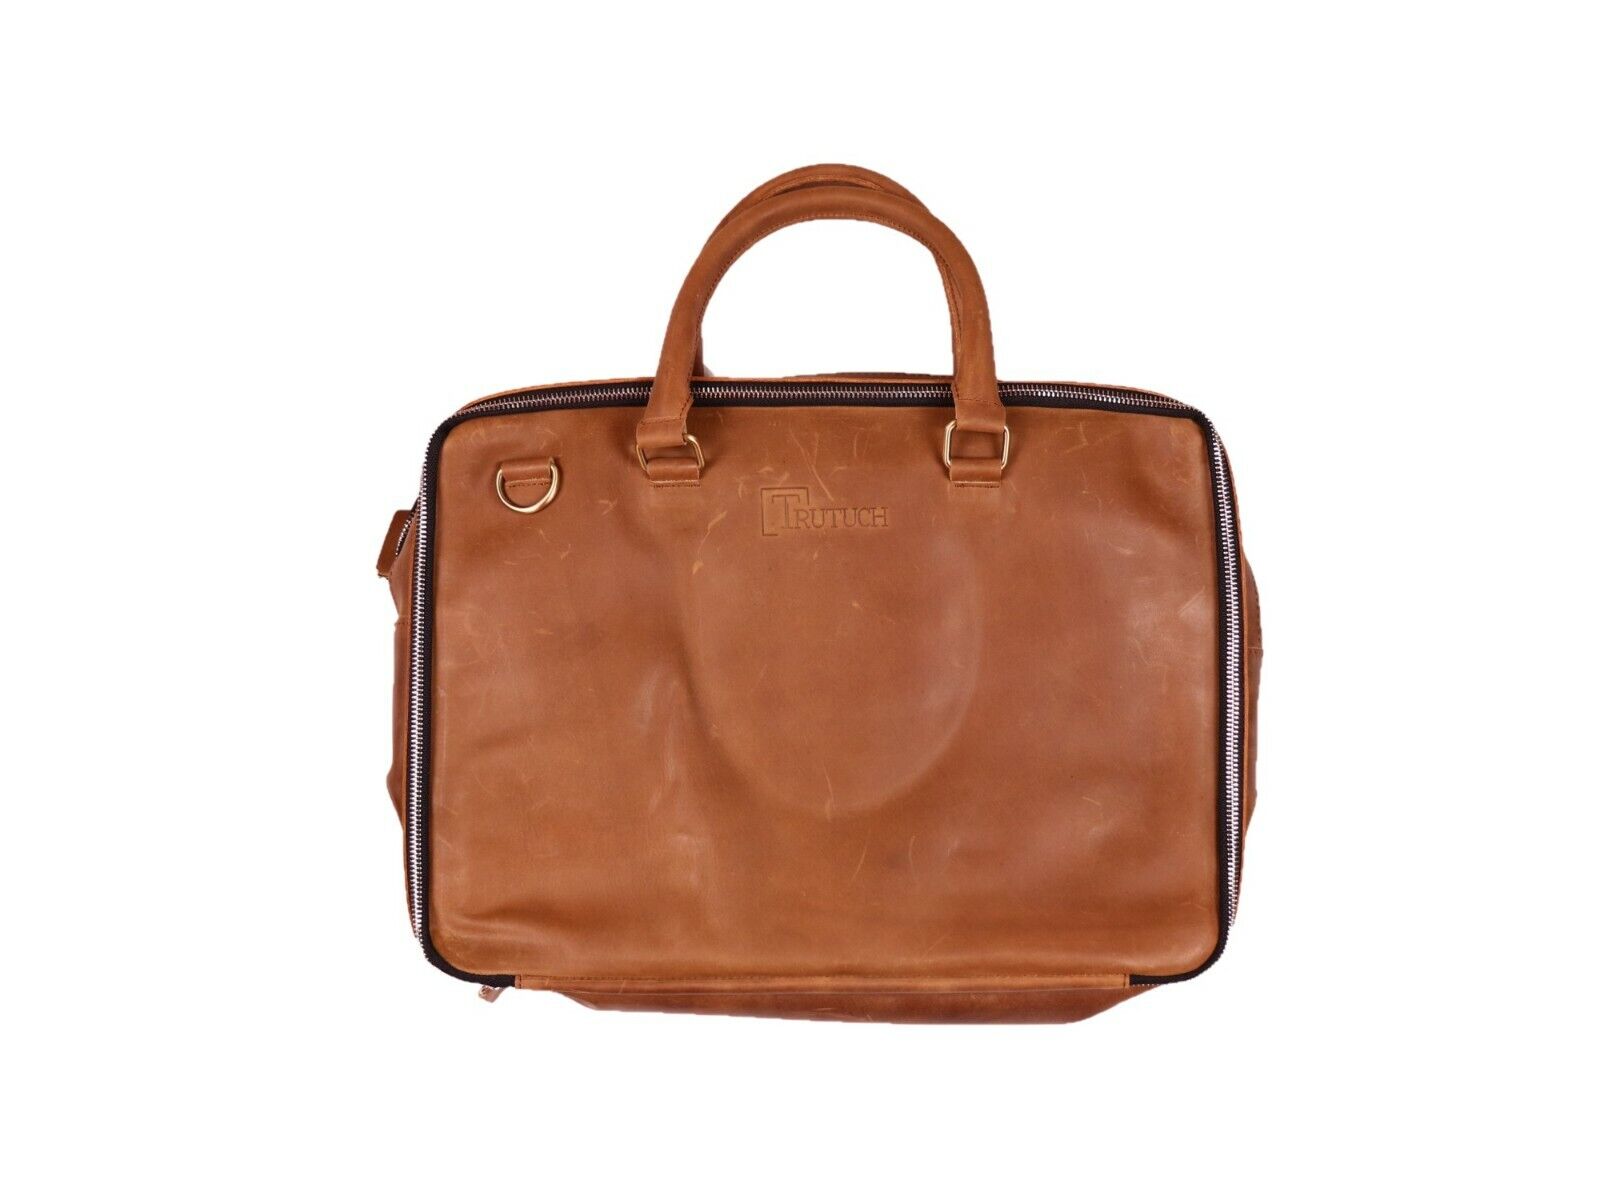 Trutuch Genuine Leather Laptop Bag | Leather Laptop Briefcase | Office Bag